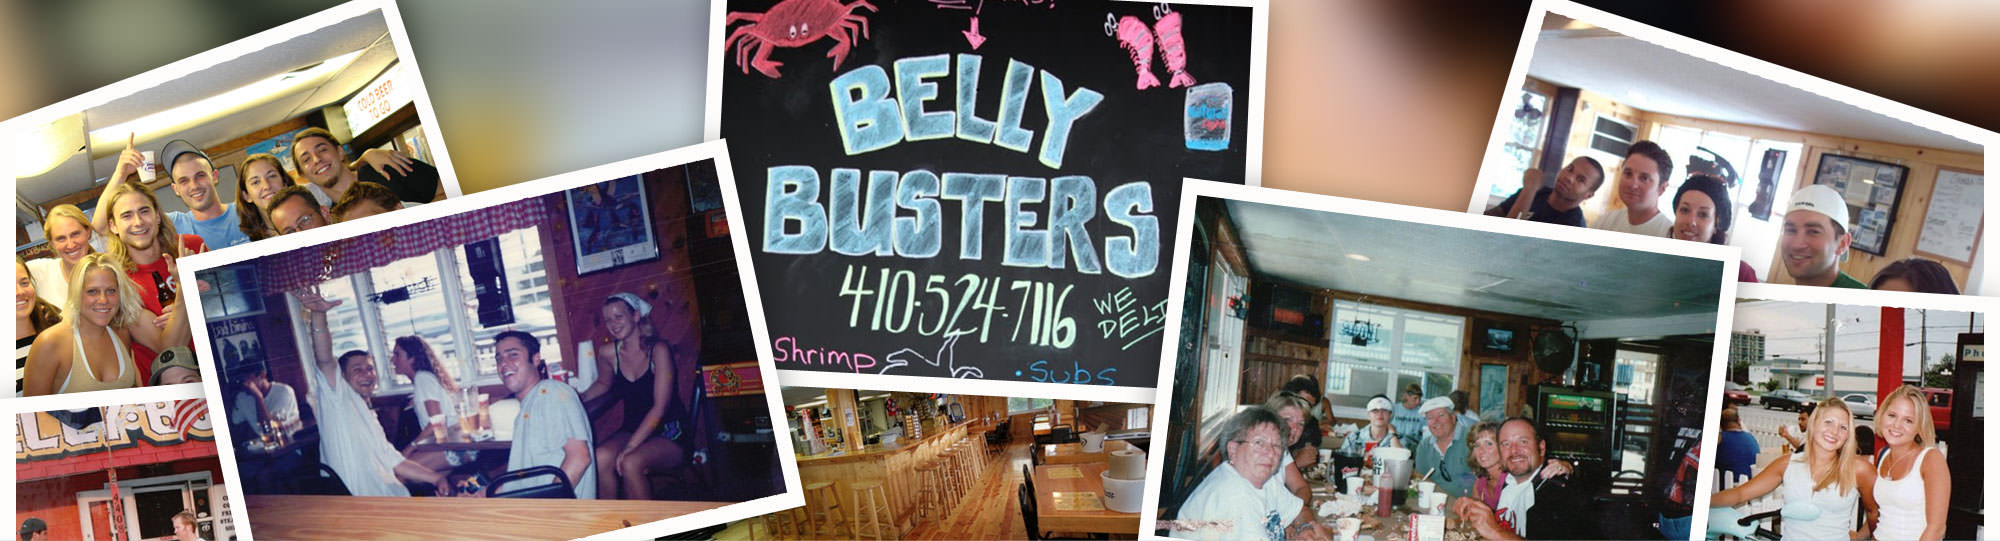 Belly Busters - Busting Bellies Since '85